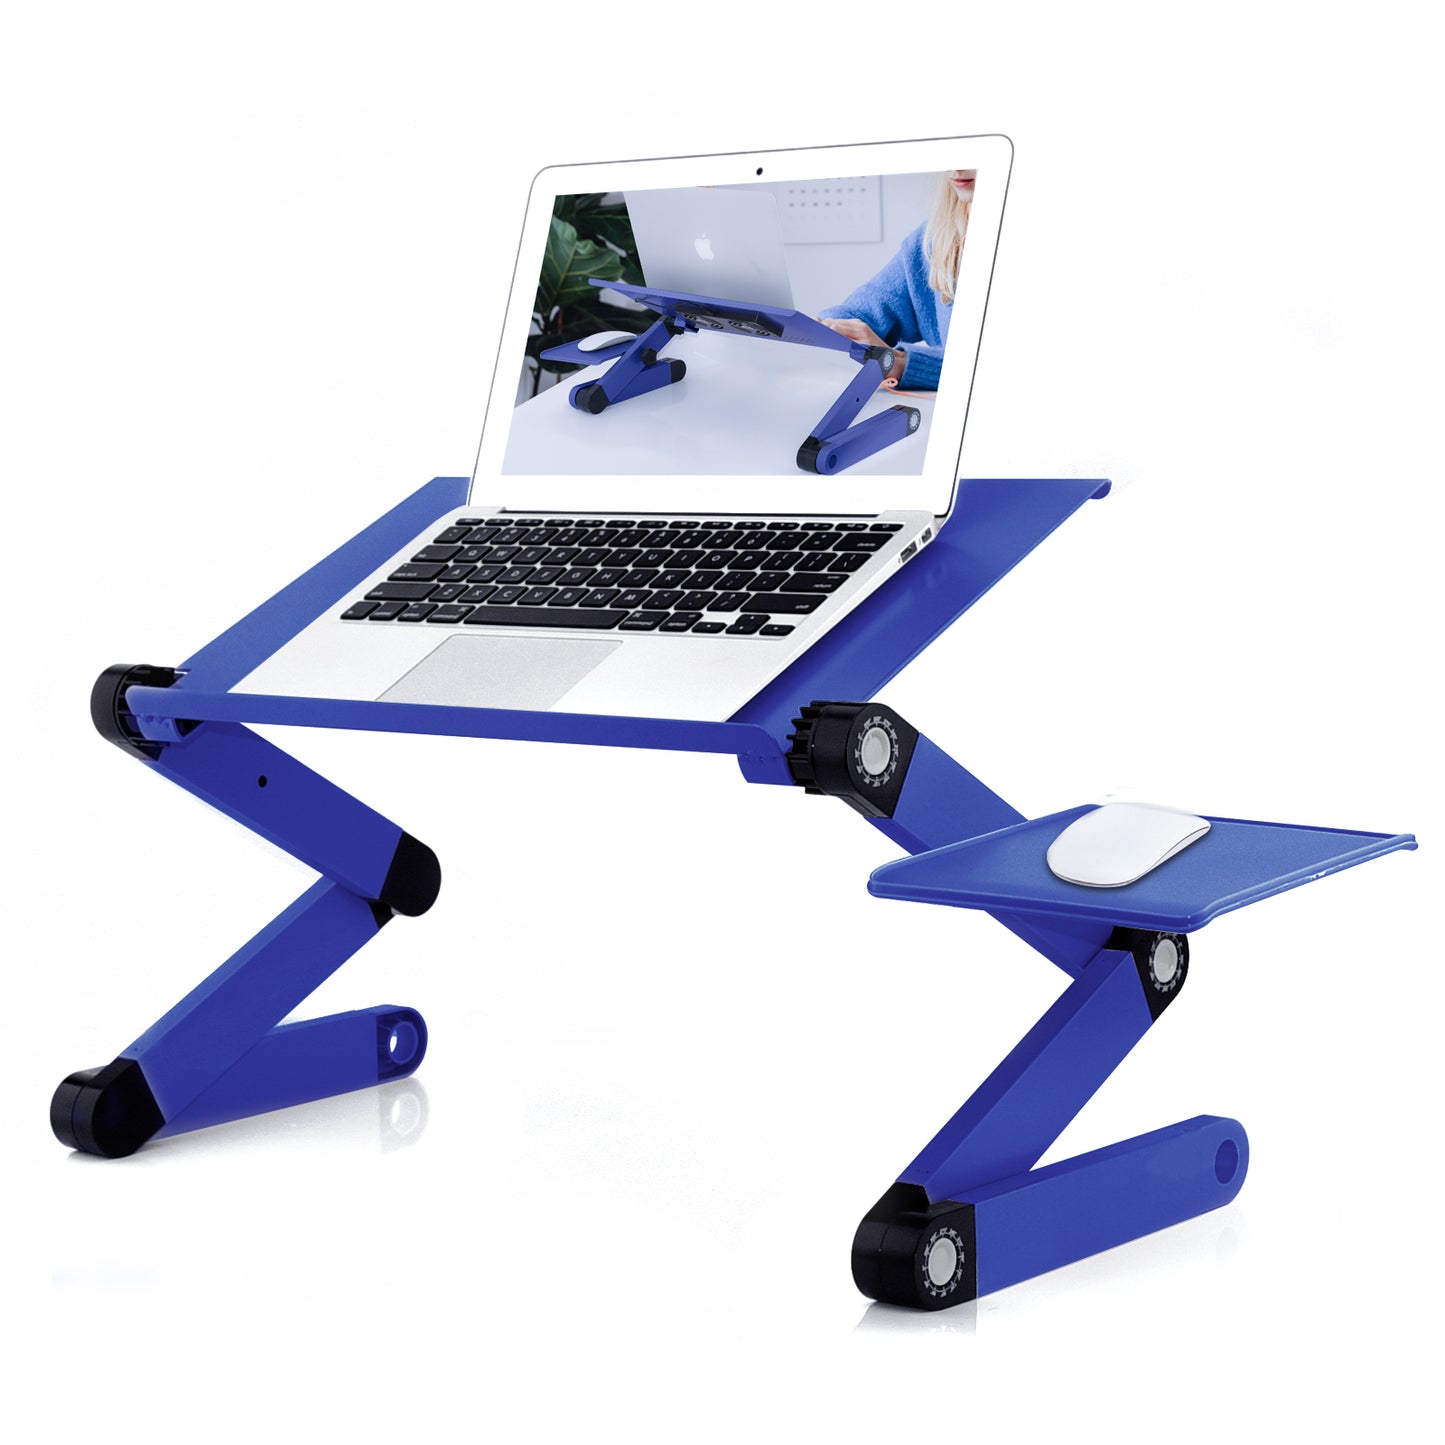 Adjustable Laptop Stand, RAINBEAN Laptop Desk with 2 CPU Cooling USB Fans for Bed Aluminum Lap Workstation Desk with Mouse Pad, Foldable Cook Book Stand Notebook Holder Sofa,Amazon Banned